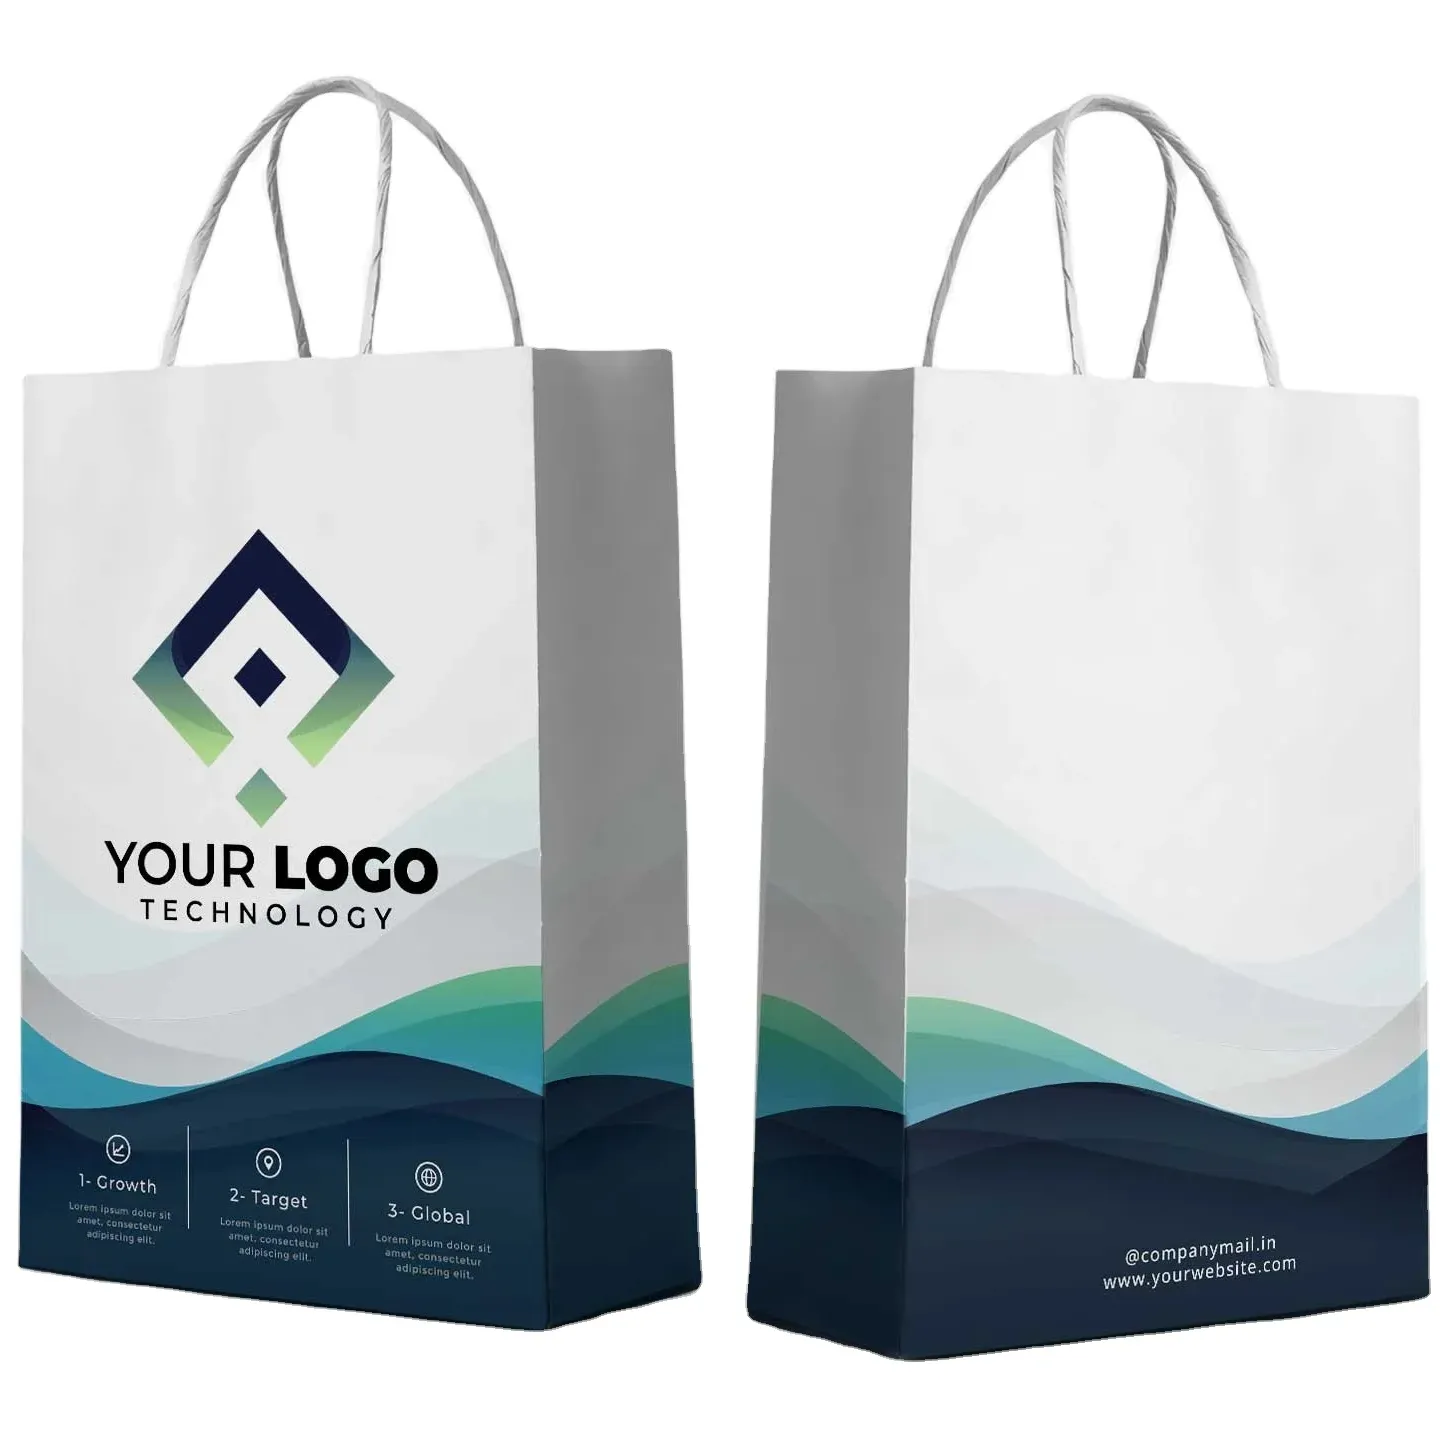 Wholesaler of Cheapest Price & Highest Quality Paper Luxury Famous Brand Gift Printed Shopping Paper Bag With Your Own Logo